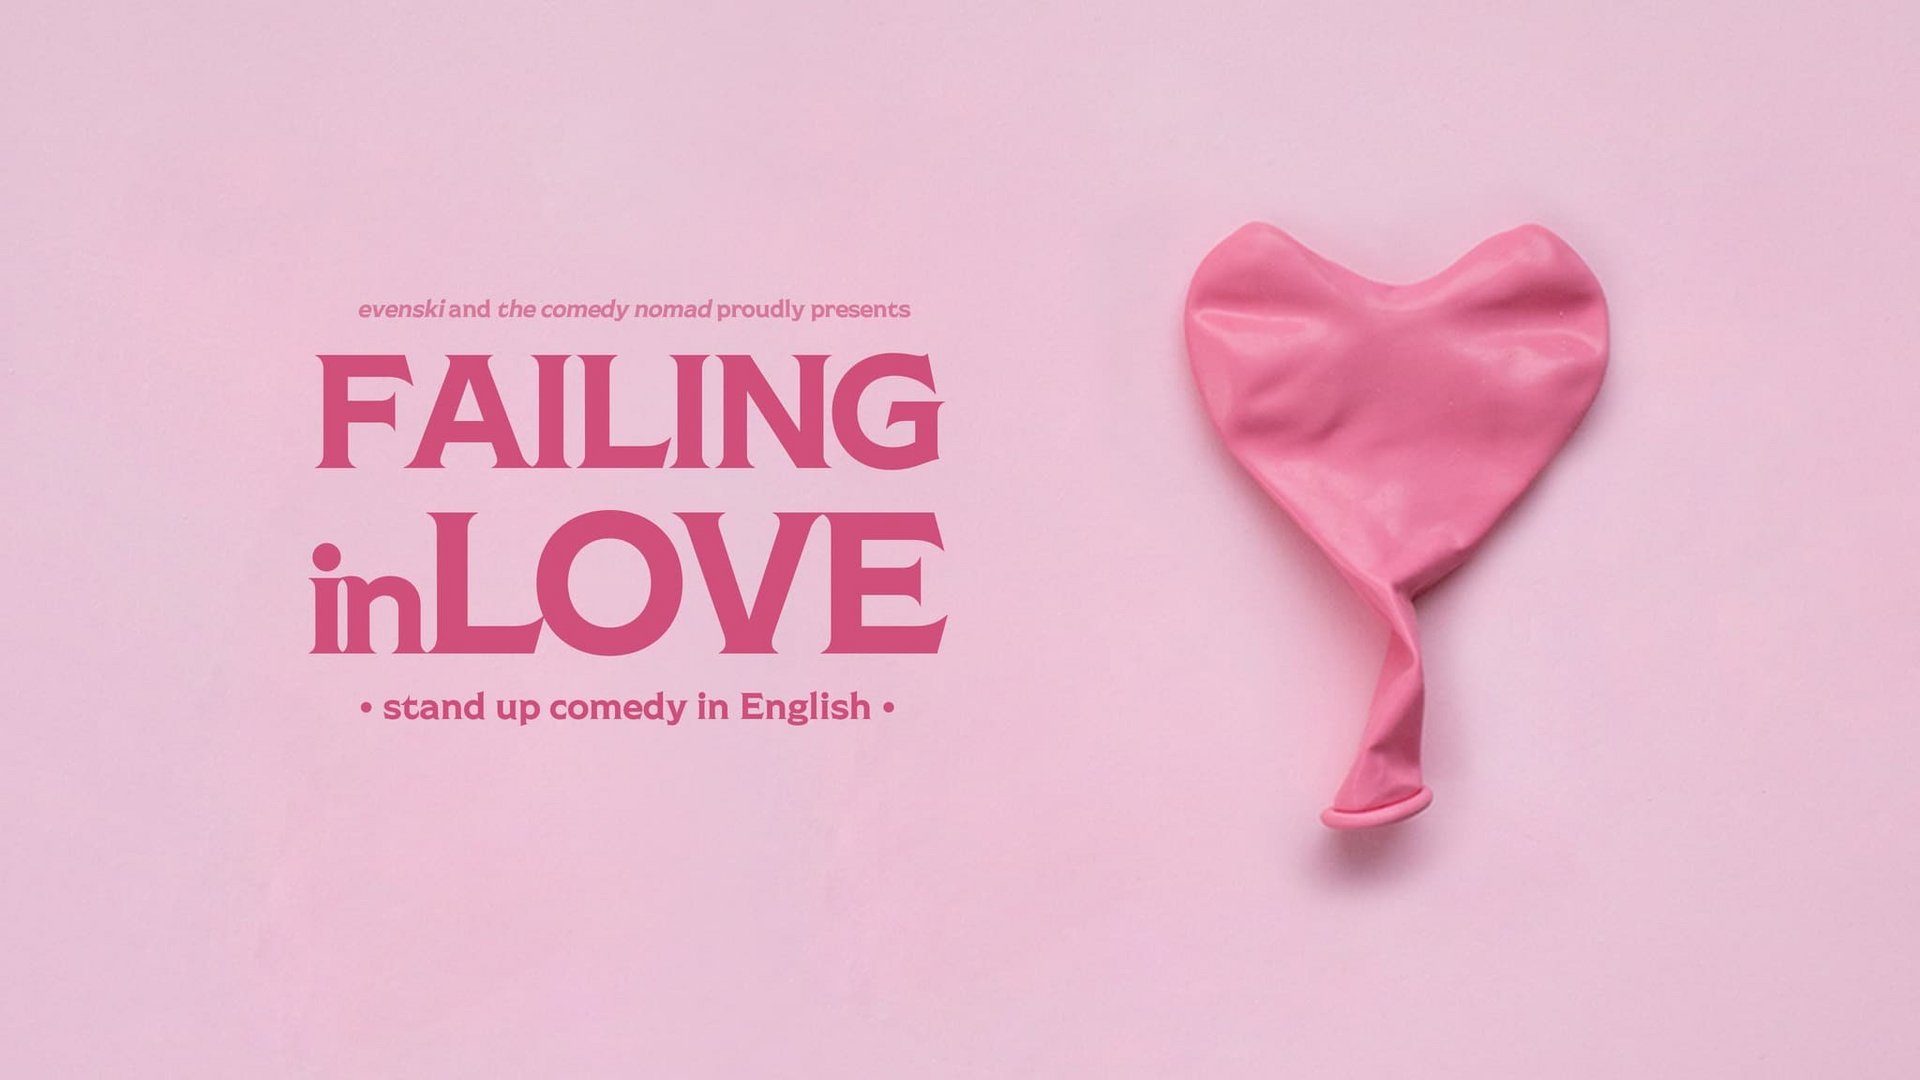 image Love, dating, comedy: English stand-up in Limassol